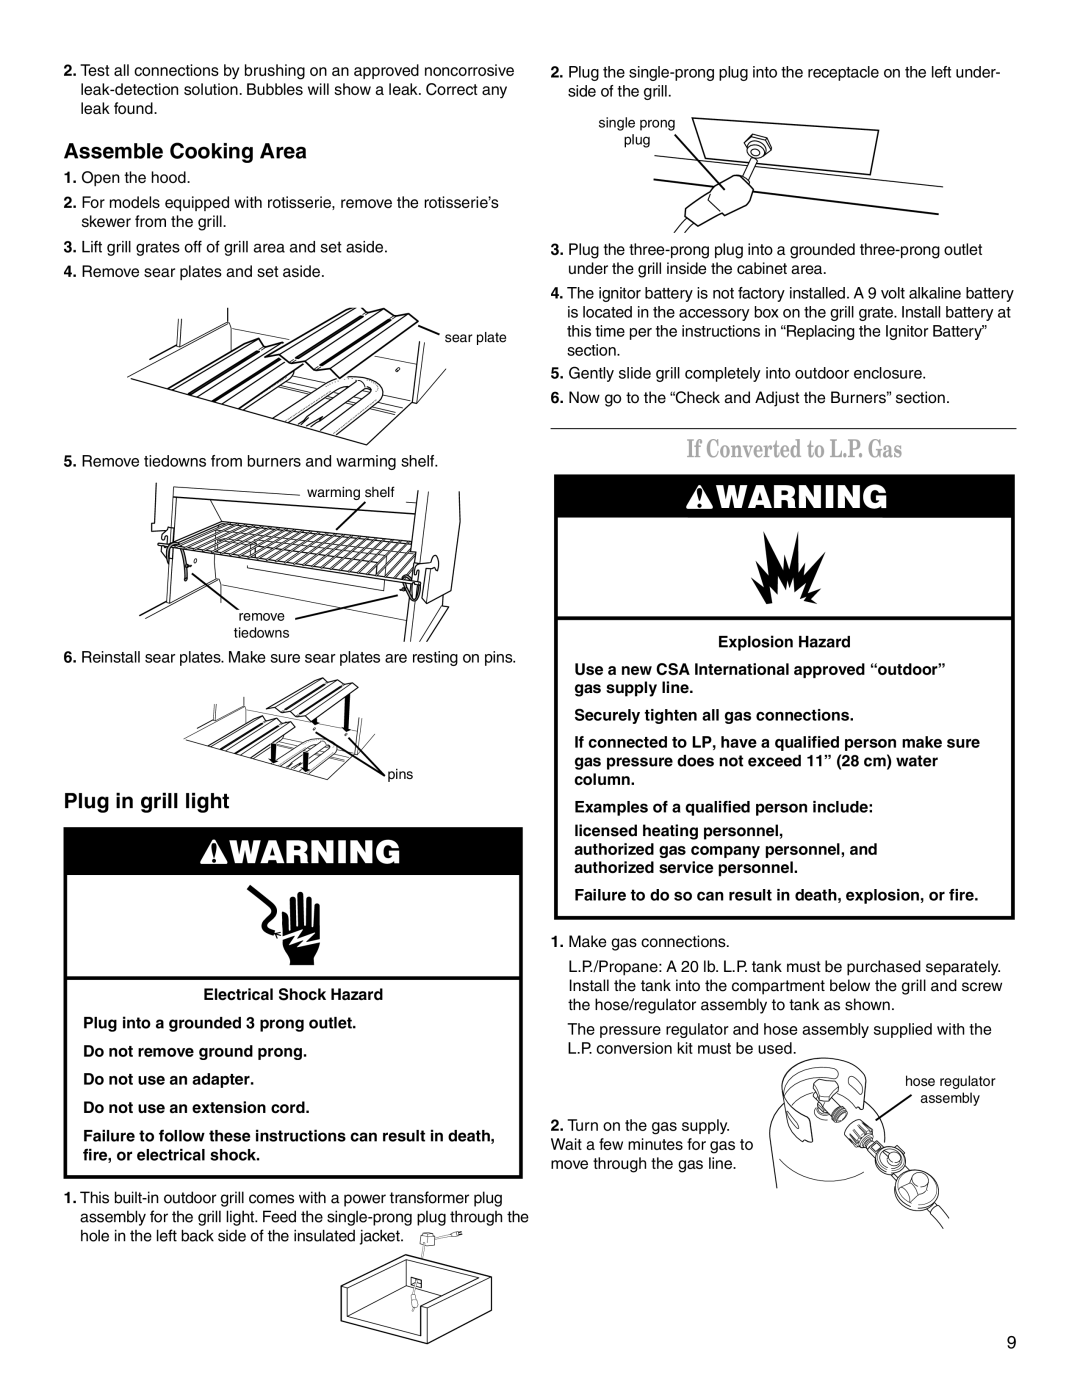 KitchenAid KBGS274SSS0 installation instructions If Converted to L.P. Gas, Assemble Cooking Area 